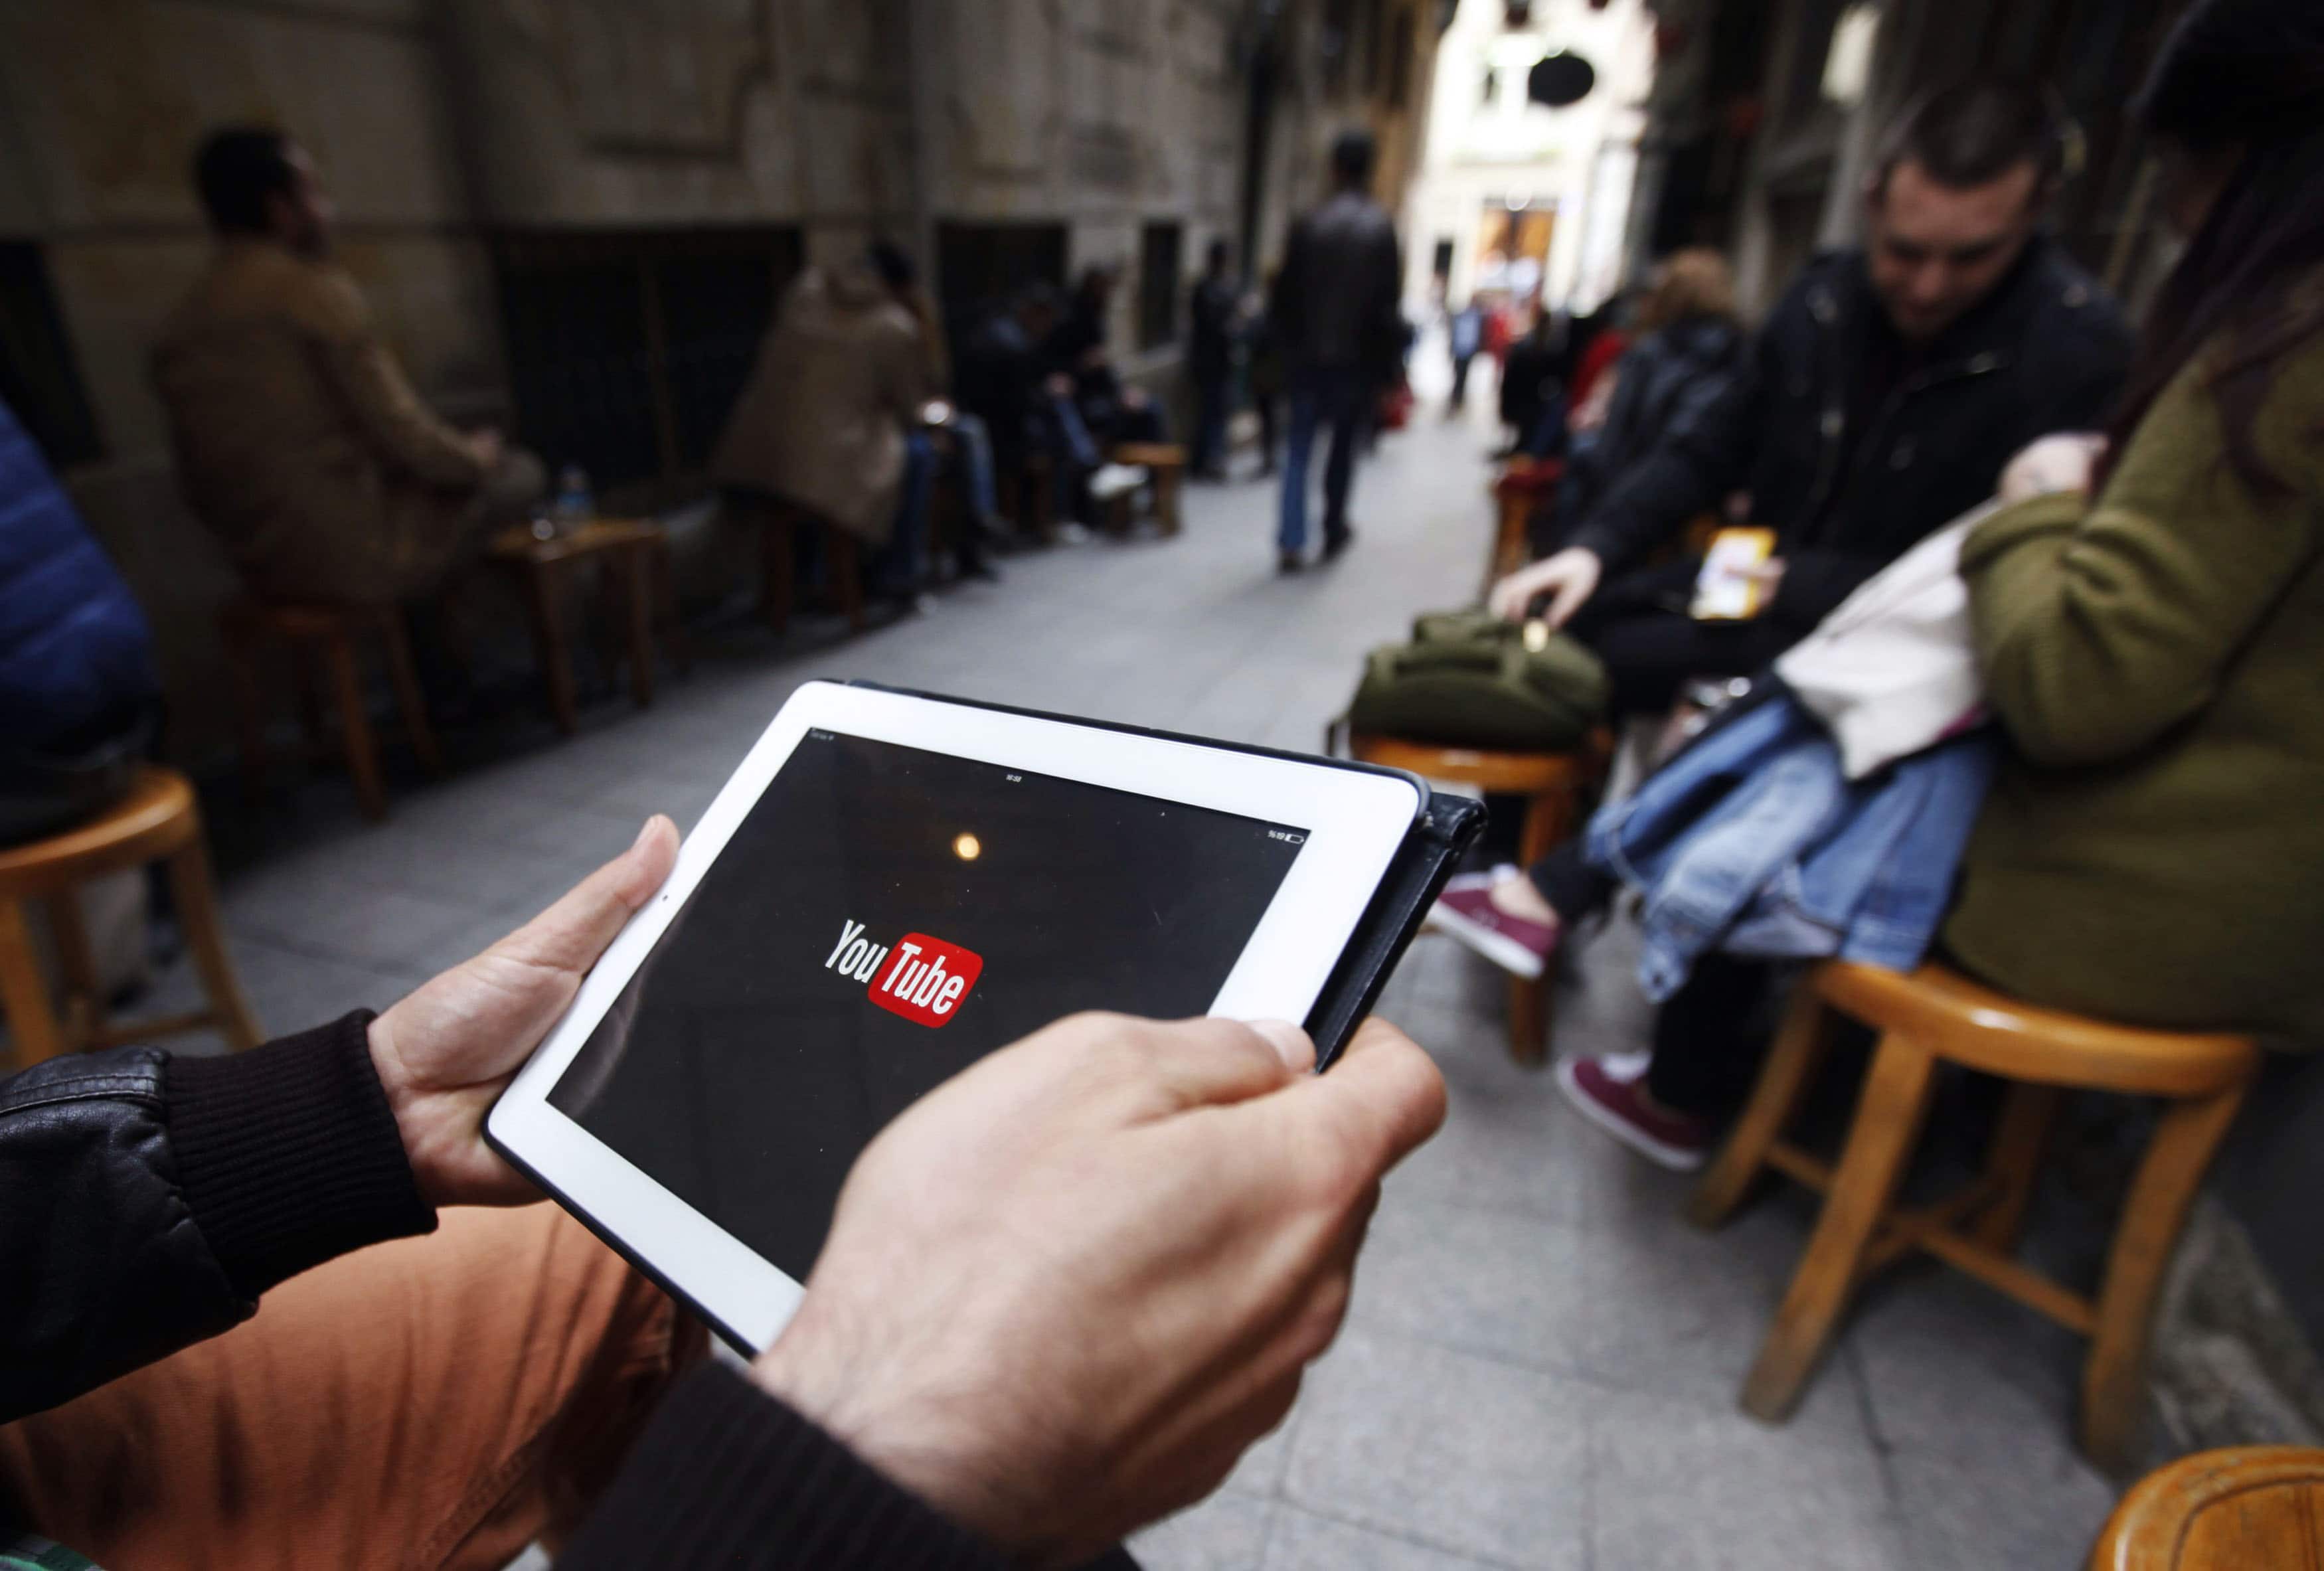 A man tries to connect to YouTube at a cafe in Istanbul, 27 March 2014, REUTERS/Osman Orsal